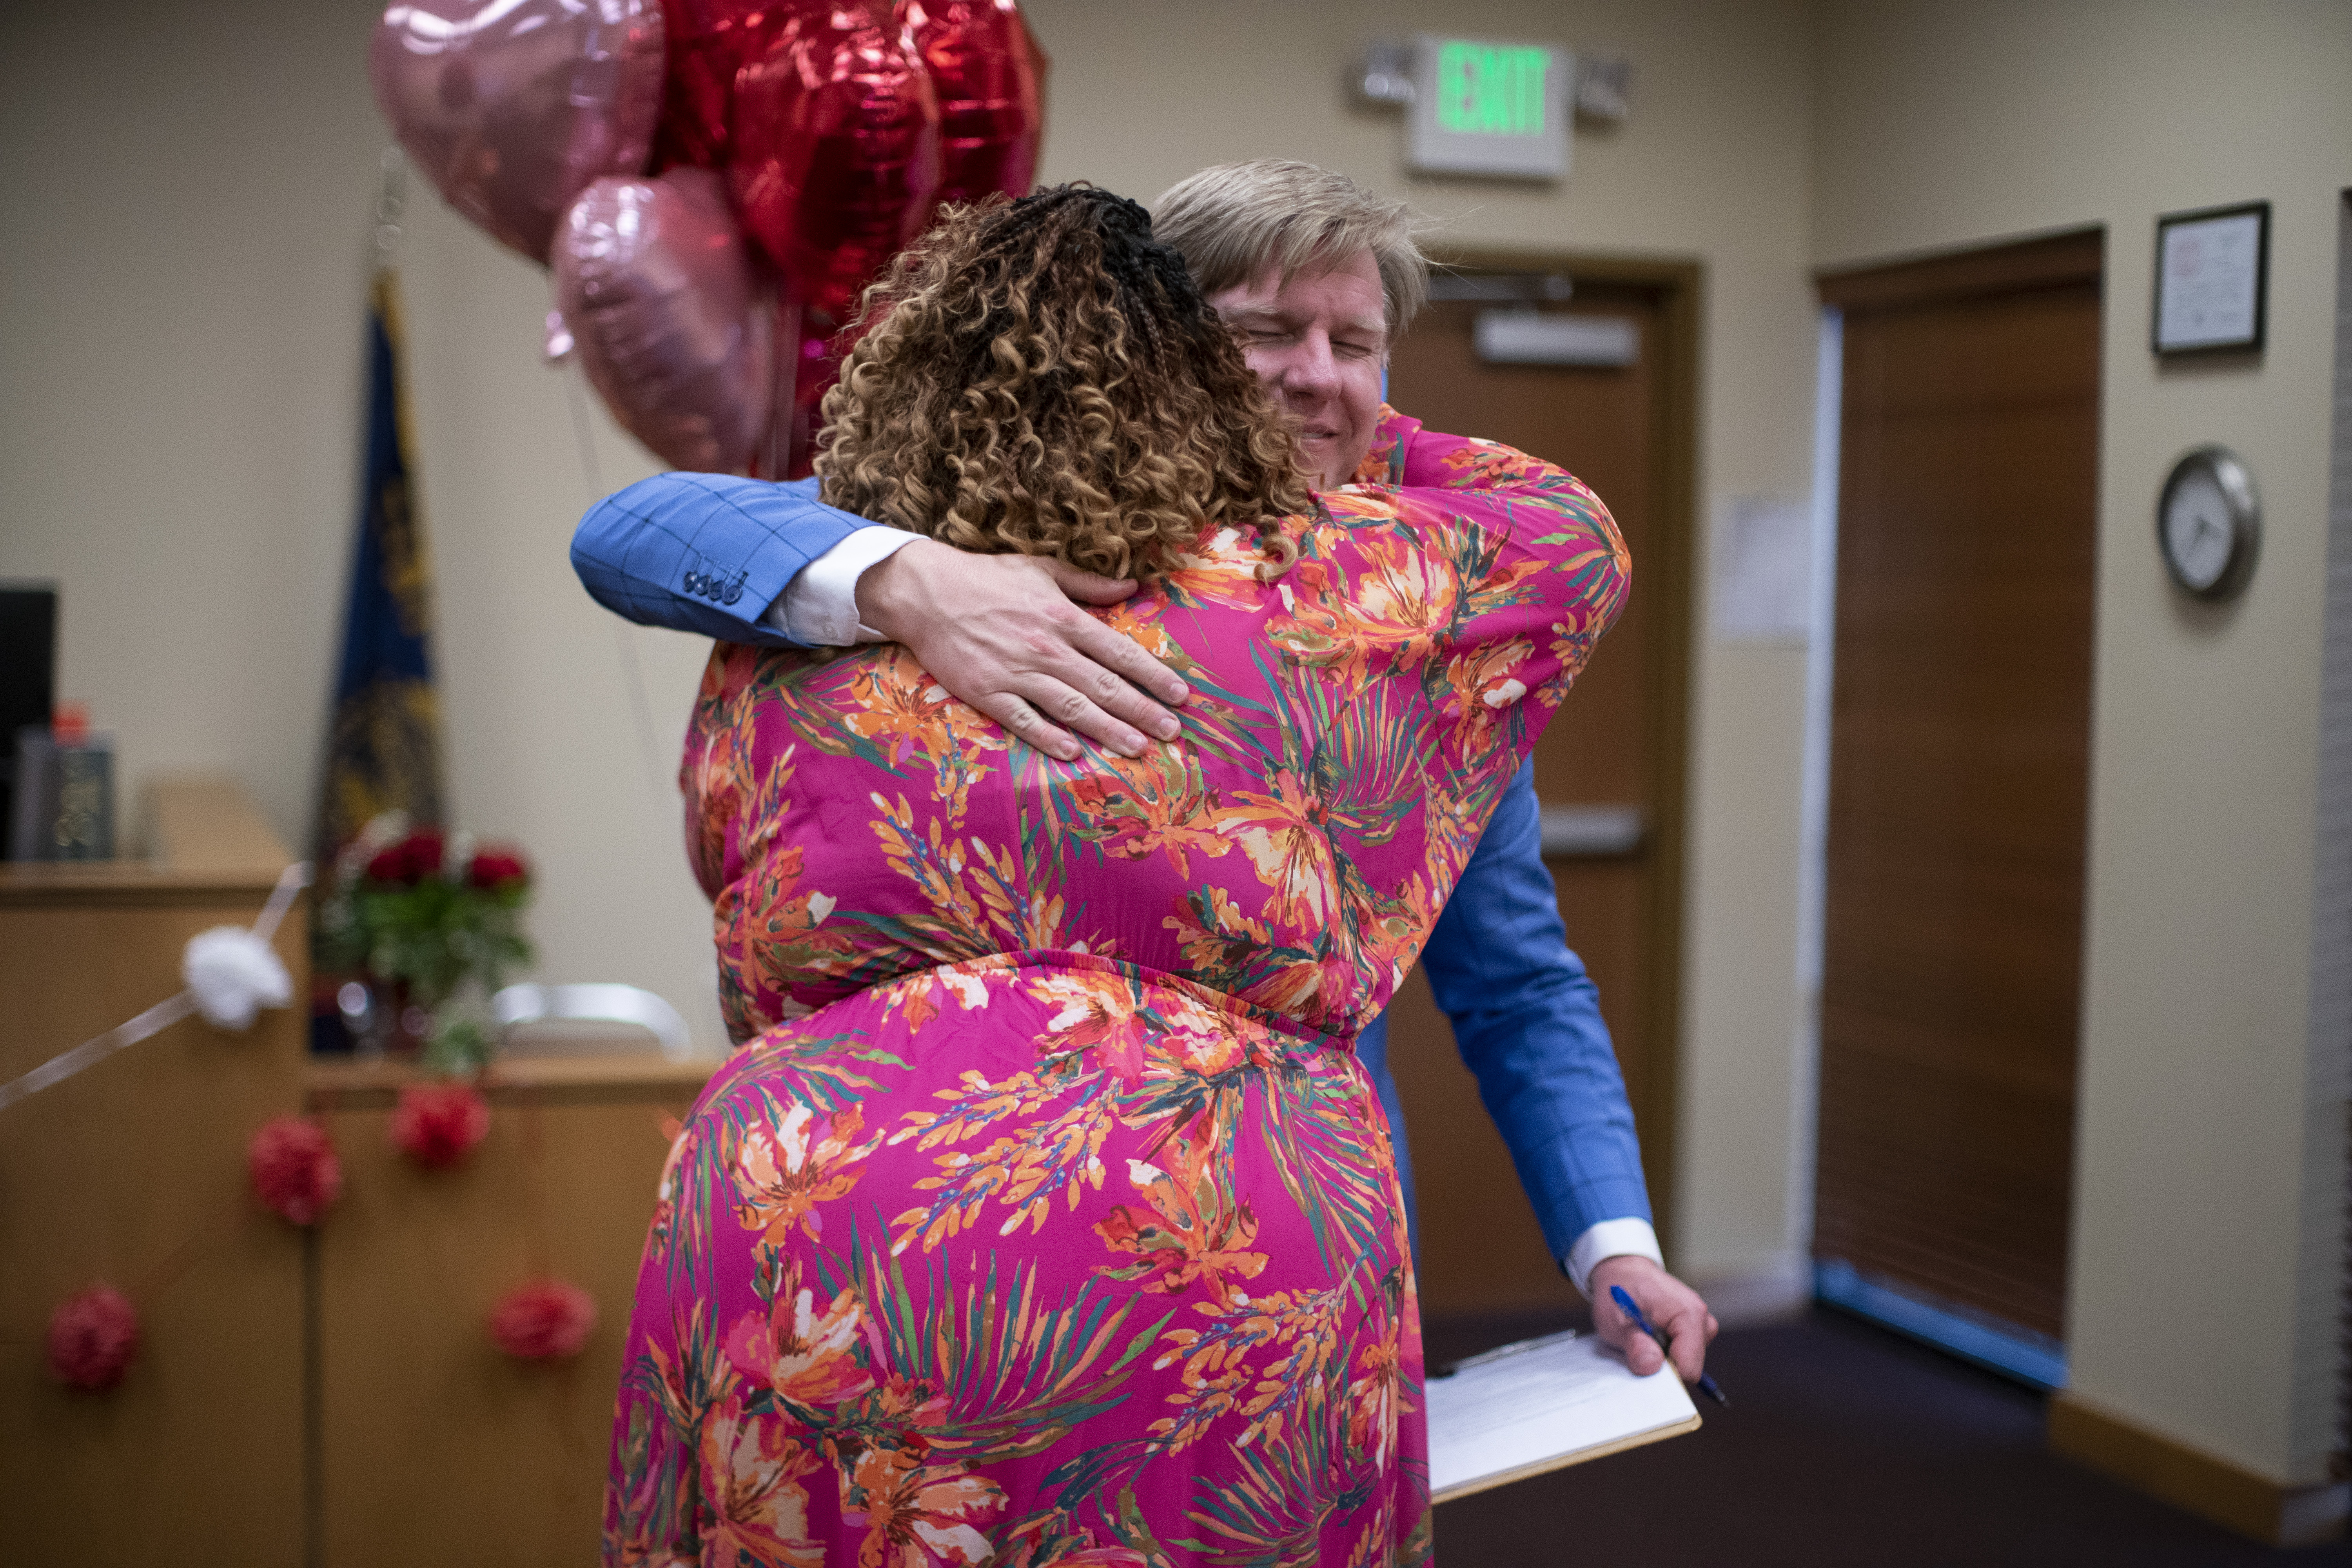 Sarah Smith embraces Justice of the Peace Justin Kidd after he officiated over her marriage to Giovani Emmanuel at the Marion County Justice Court in Salem, February 14, 2023. Beth Nakamura/The Oregonian